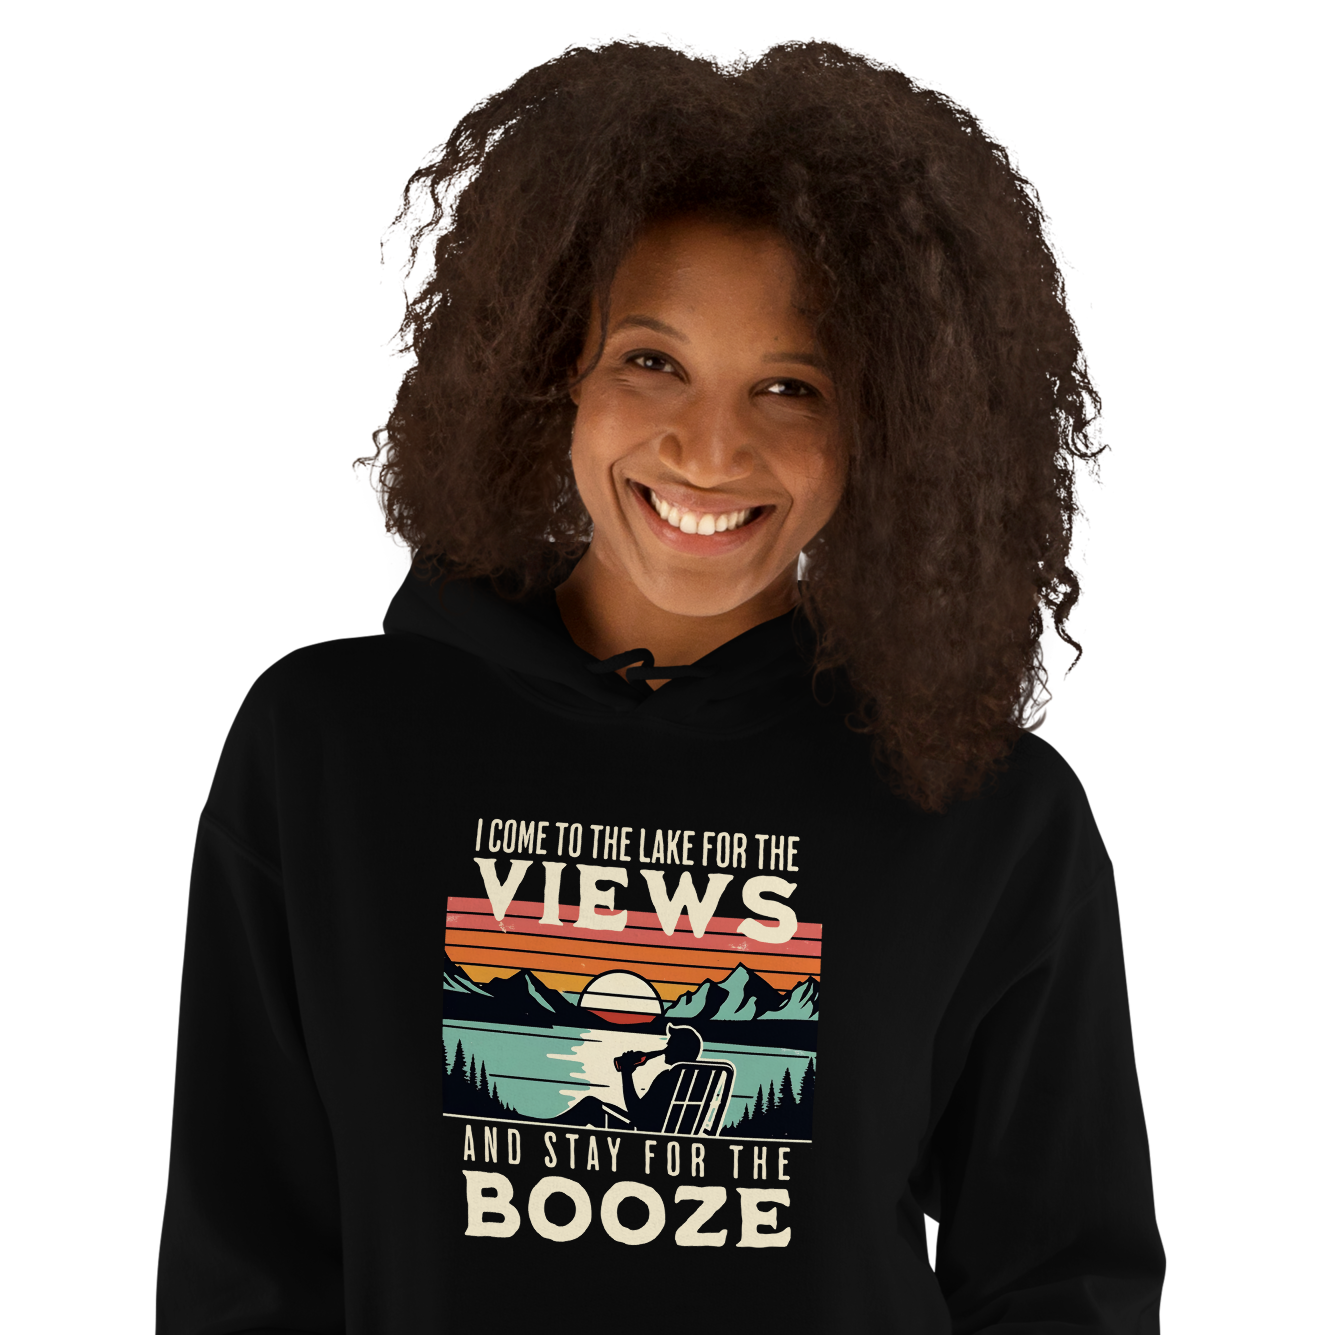 Hoodie featuring "I Come to the Lake for the Views and Stay for the Booze," with a man in a beach chair by the lake and a retro sunset.